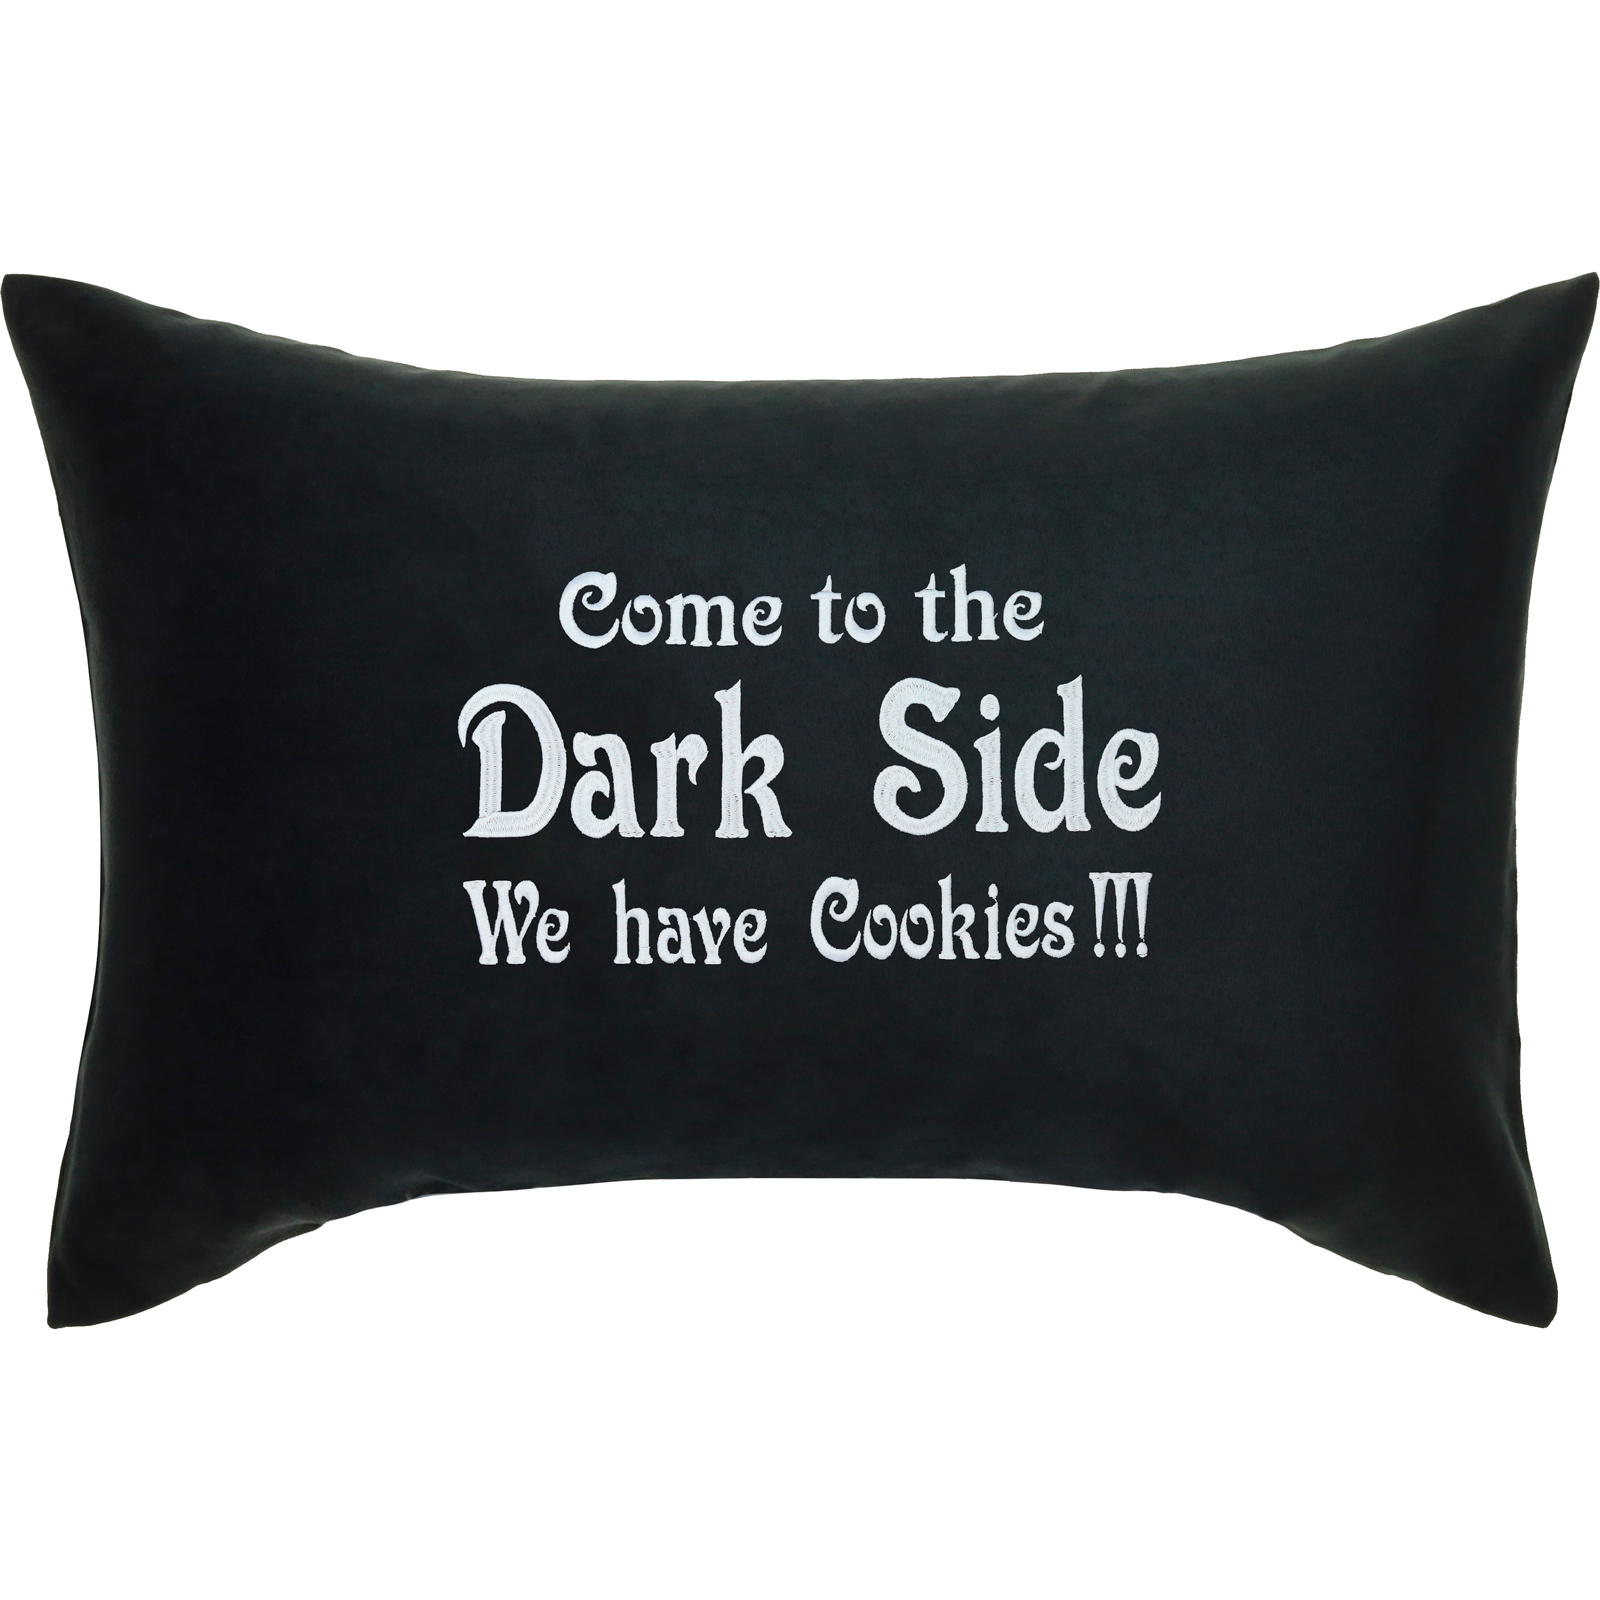 Come to the Dark Side, we have Cookies